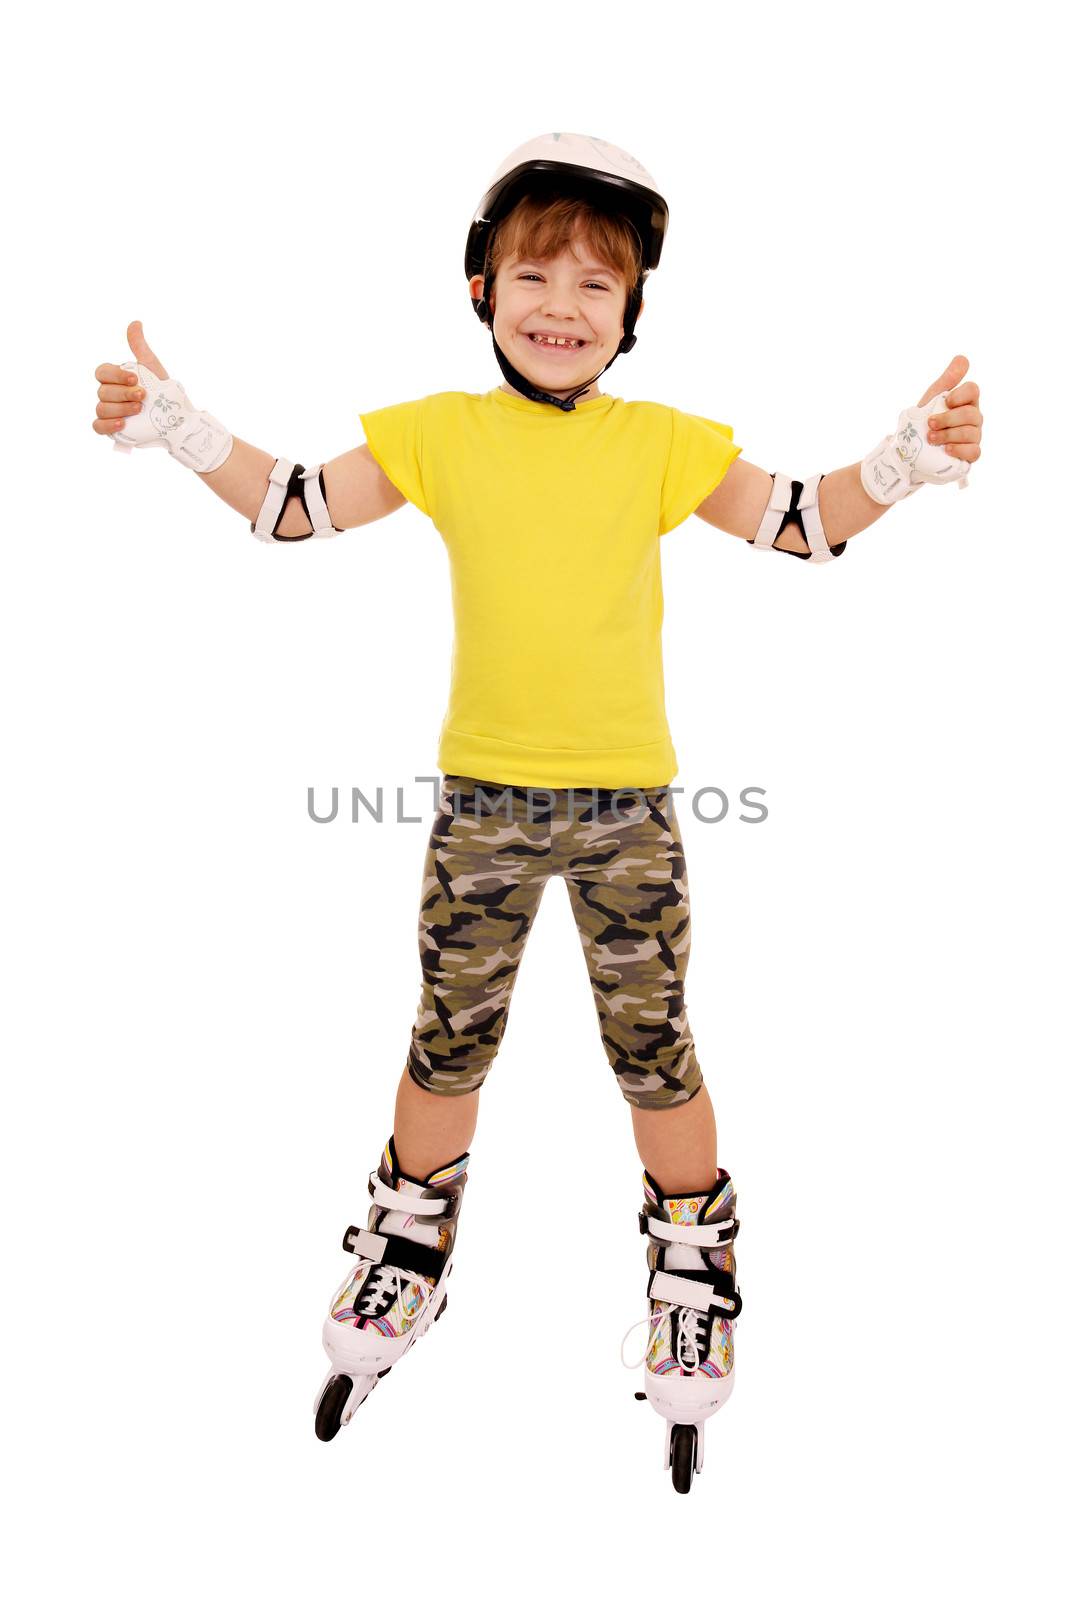 little girl with roller skates and thumbs up